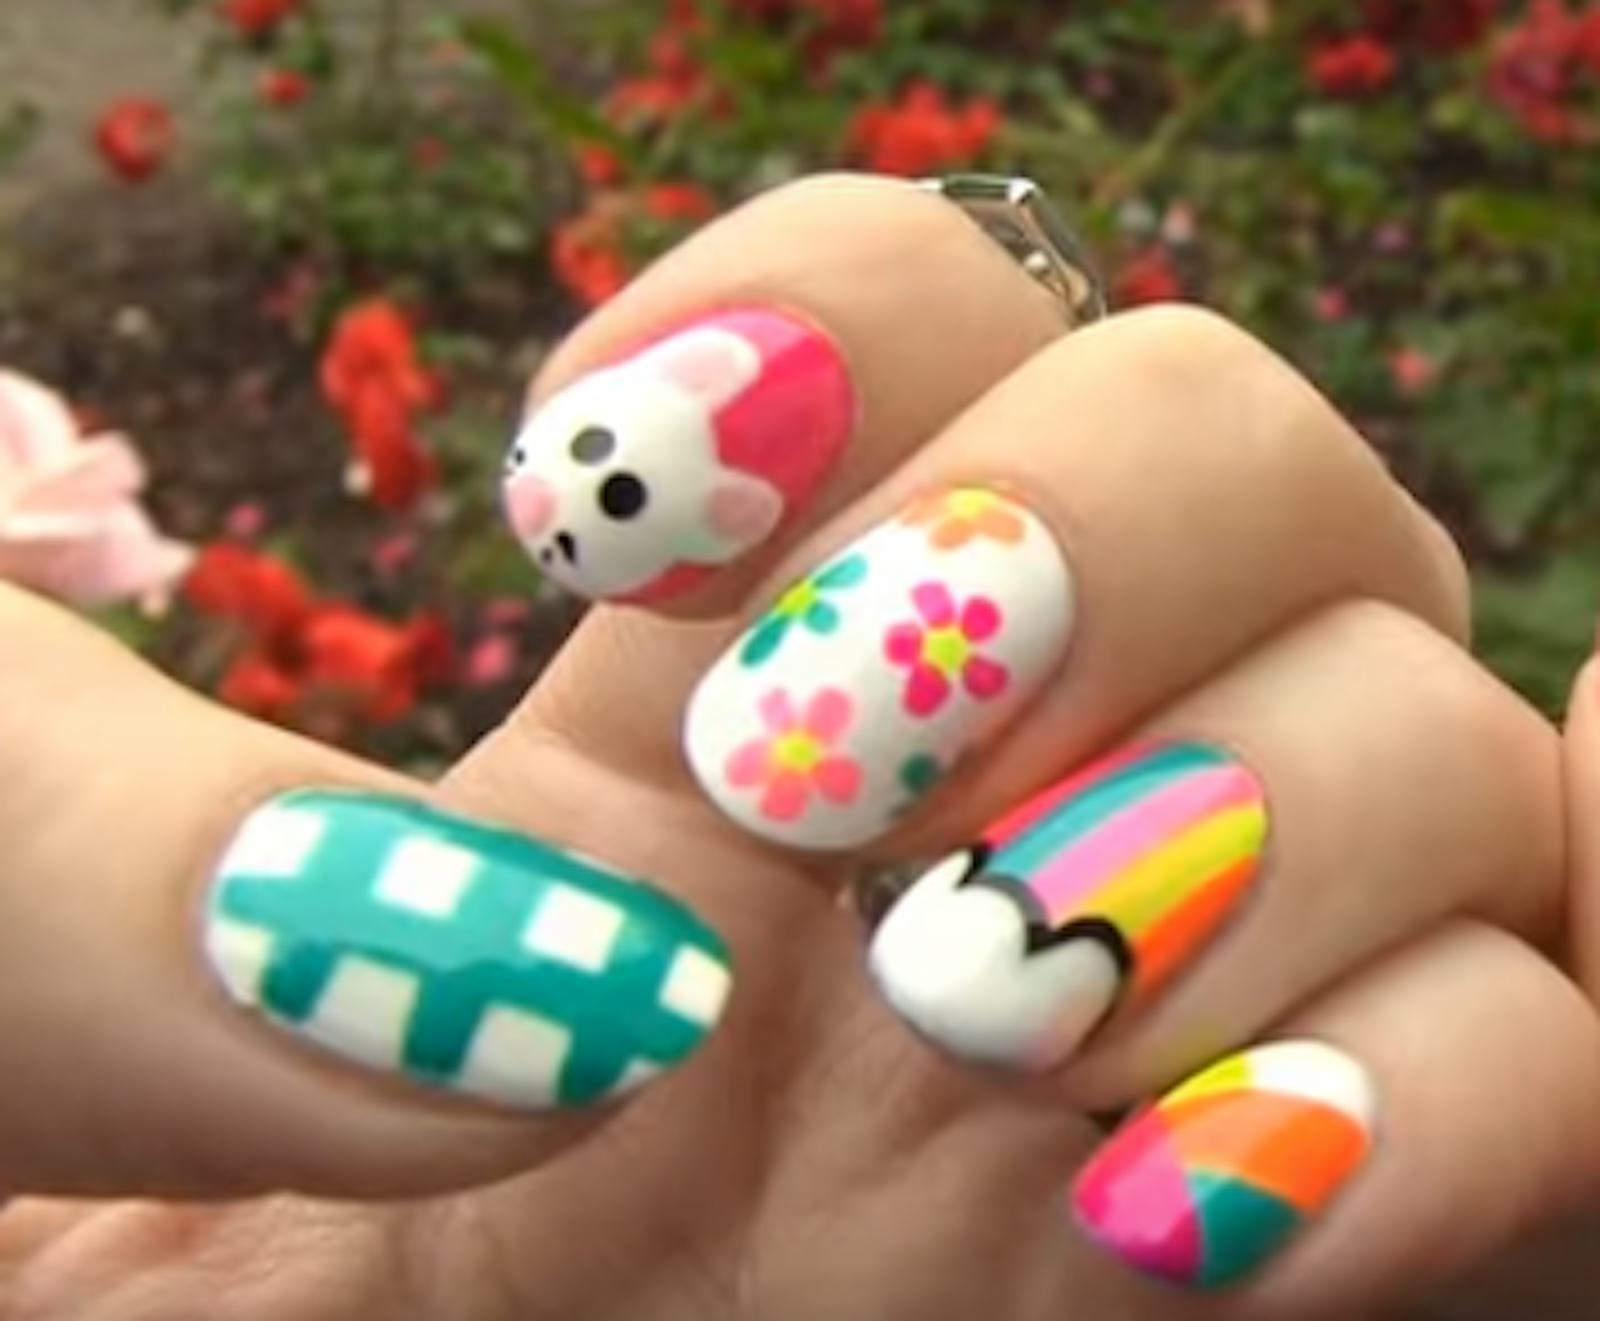 2. DIY Nail Art Techniques for Beginners - wide 8